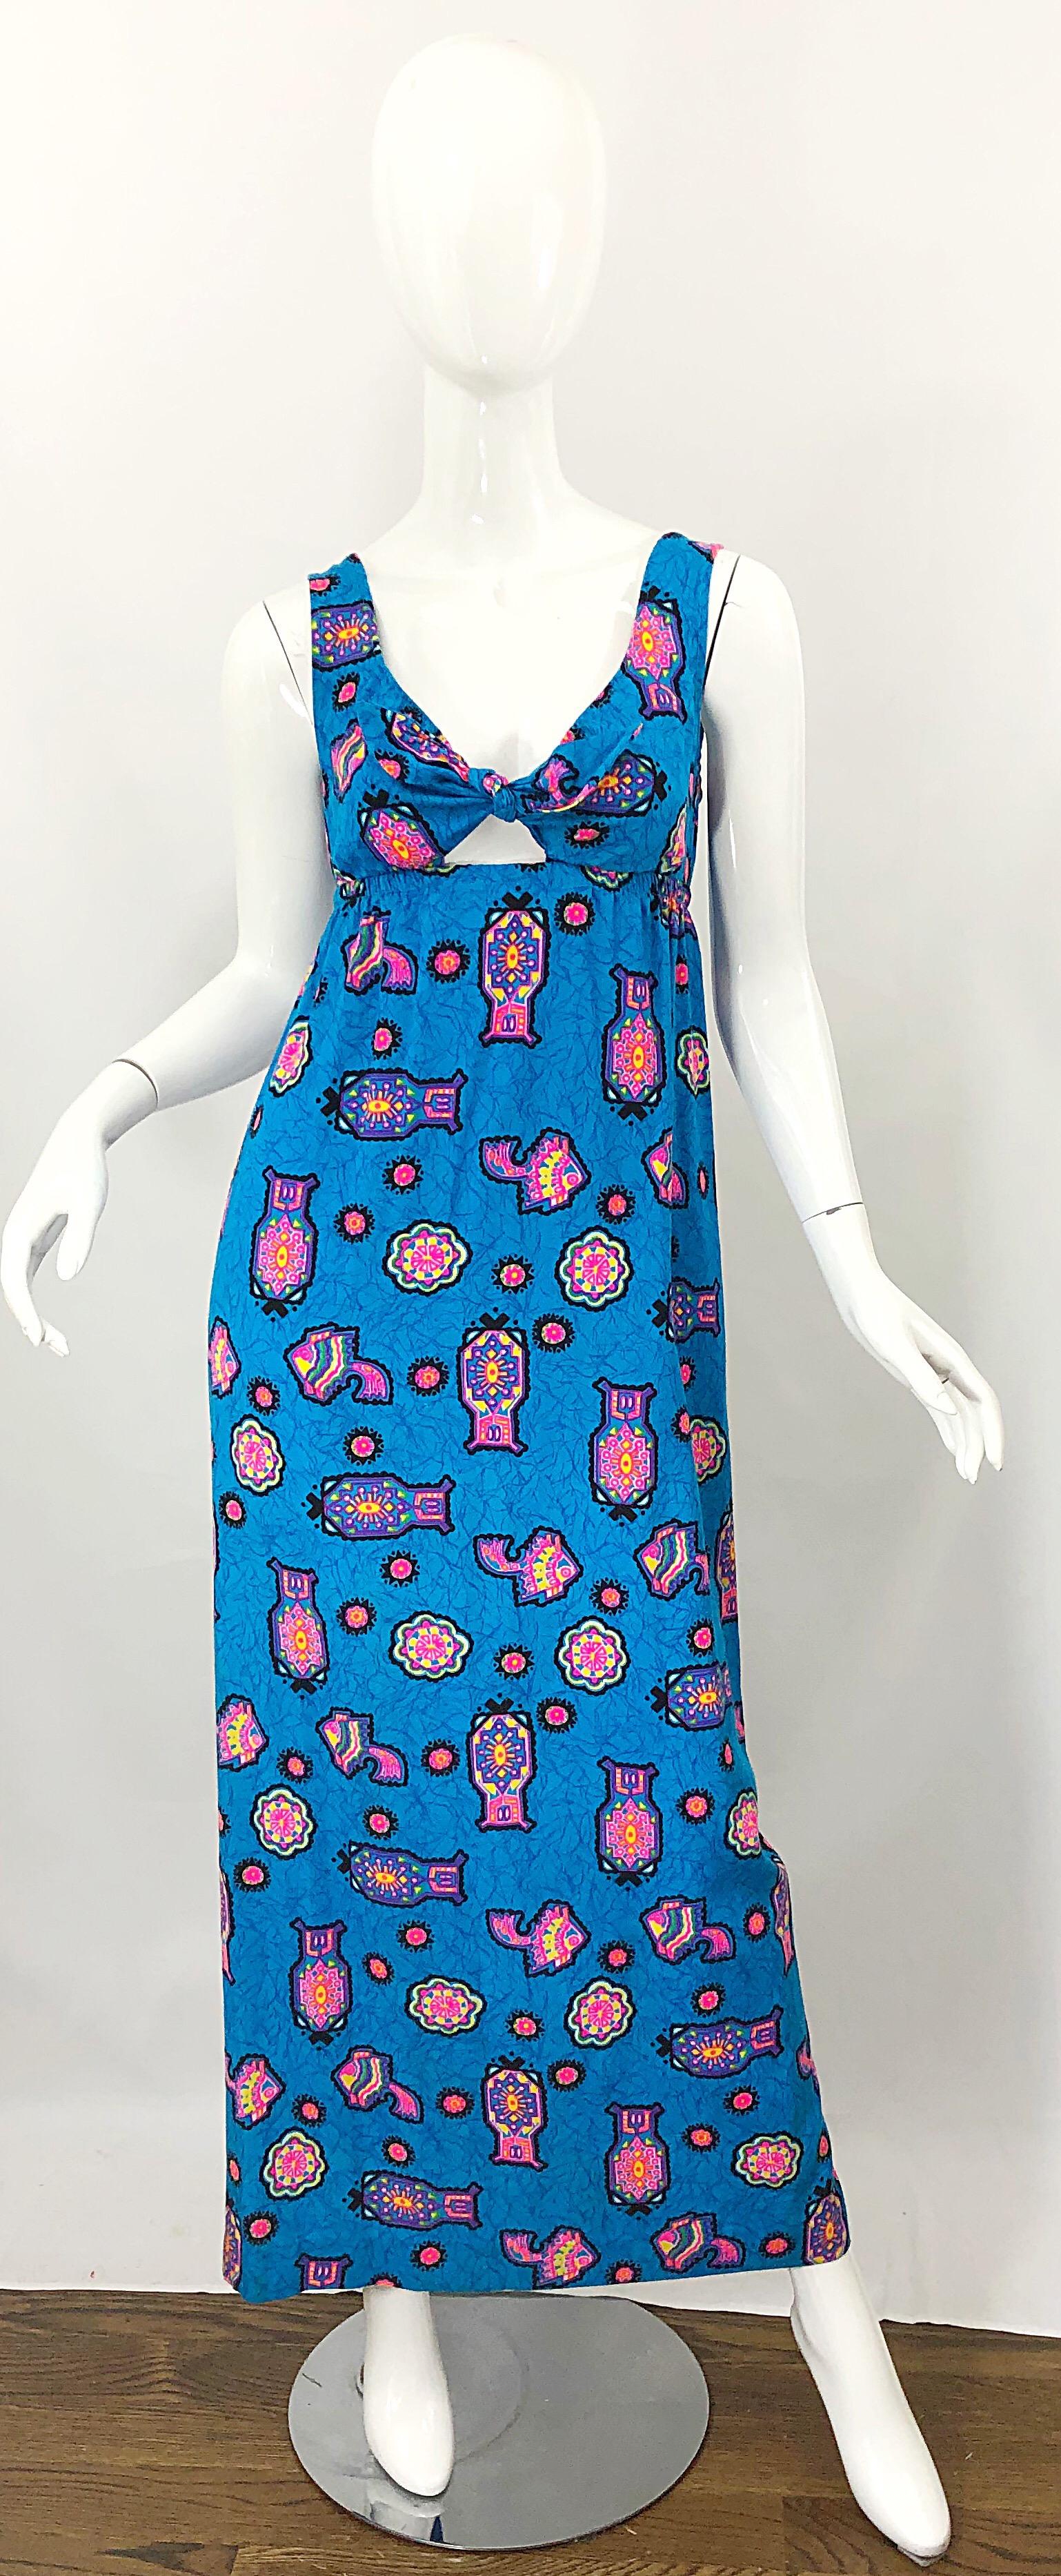 Amazing 1970s cerulean blue and pink cotton blend Aztec abstract print cut-out maxi dress! Features vibrant colors of hot pink, yellow, purple, and green throughout. Simply slips over the head, and stretches with an elastic high waist. Ties at the